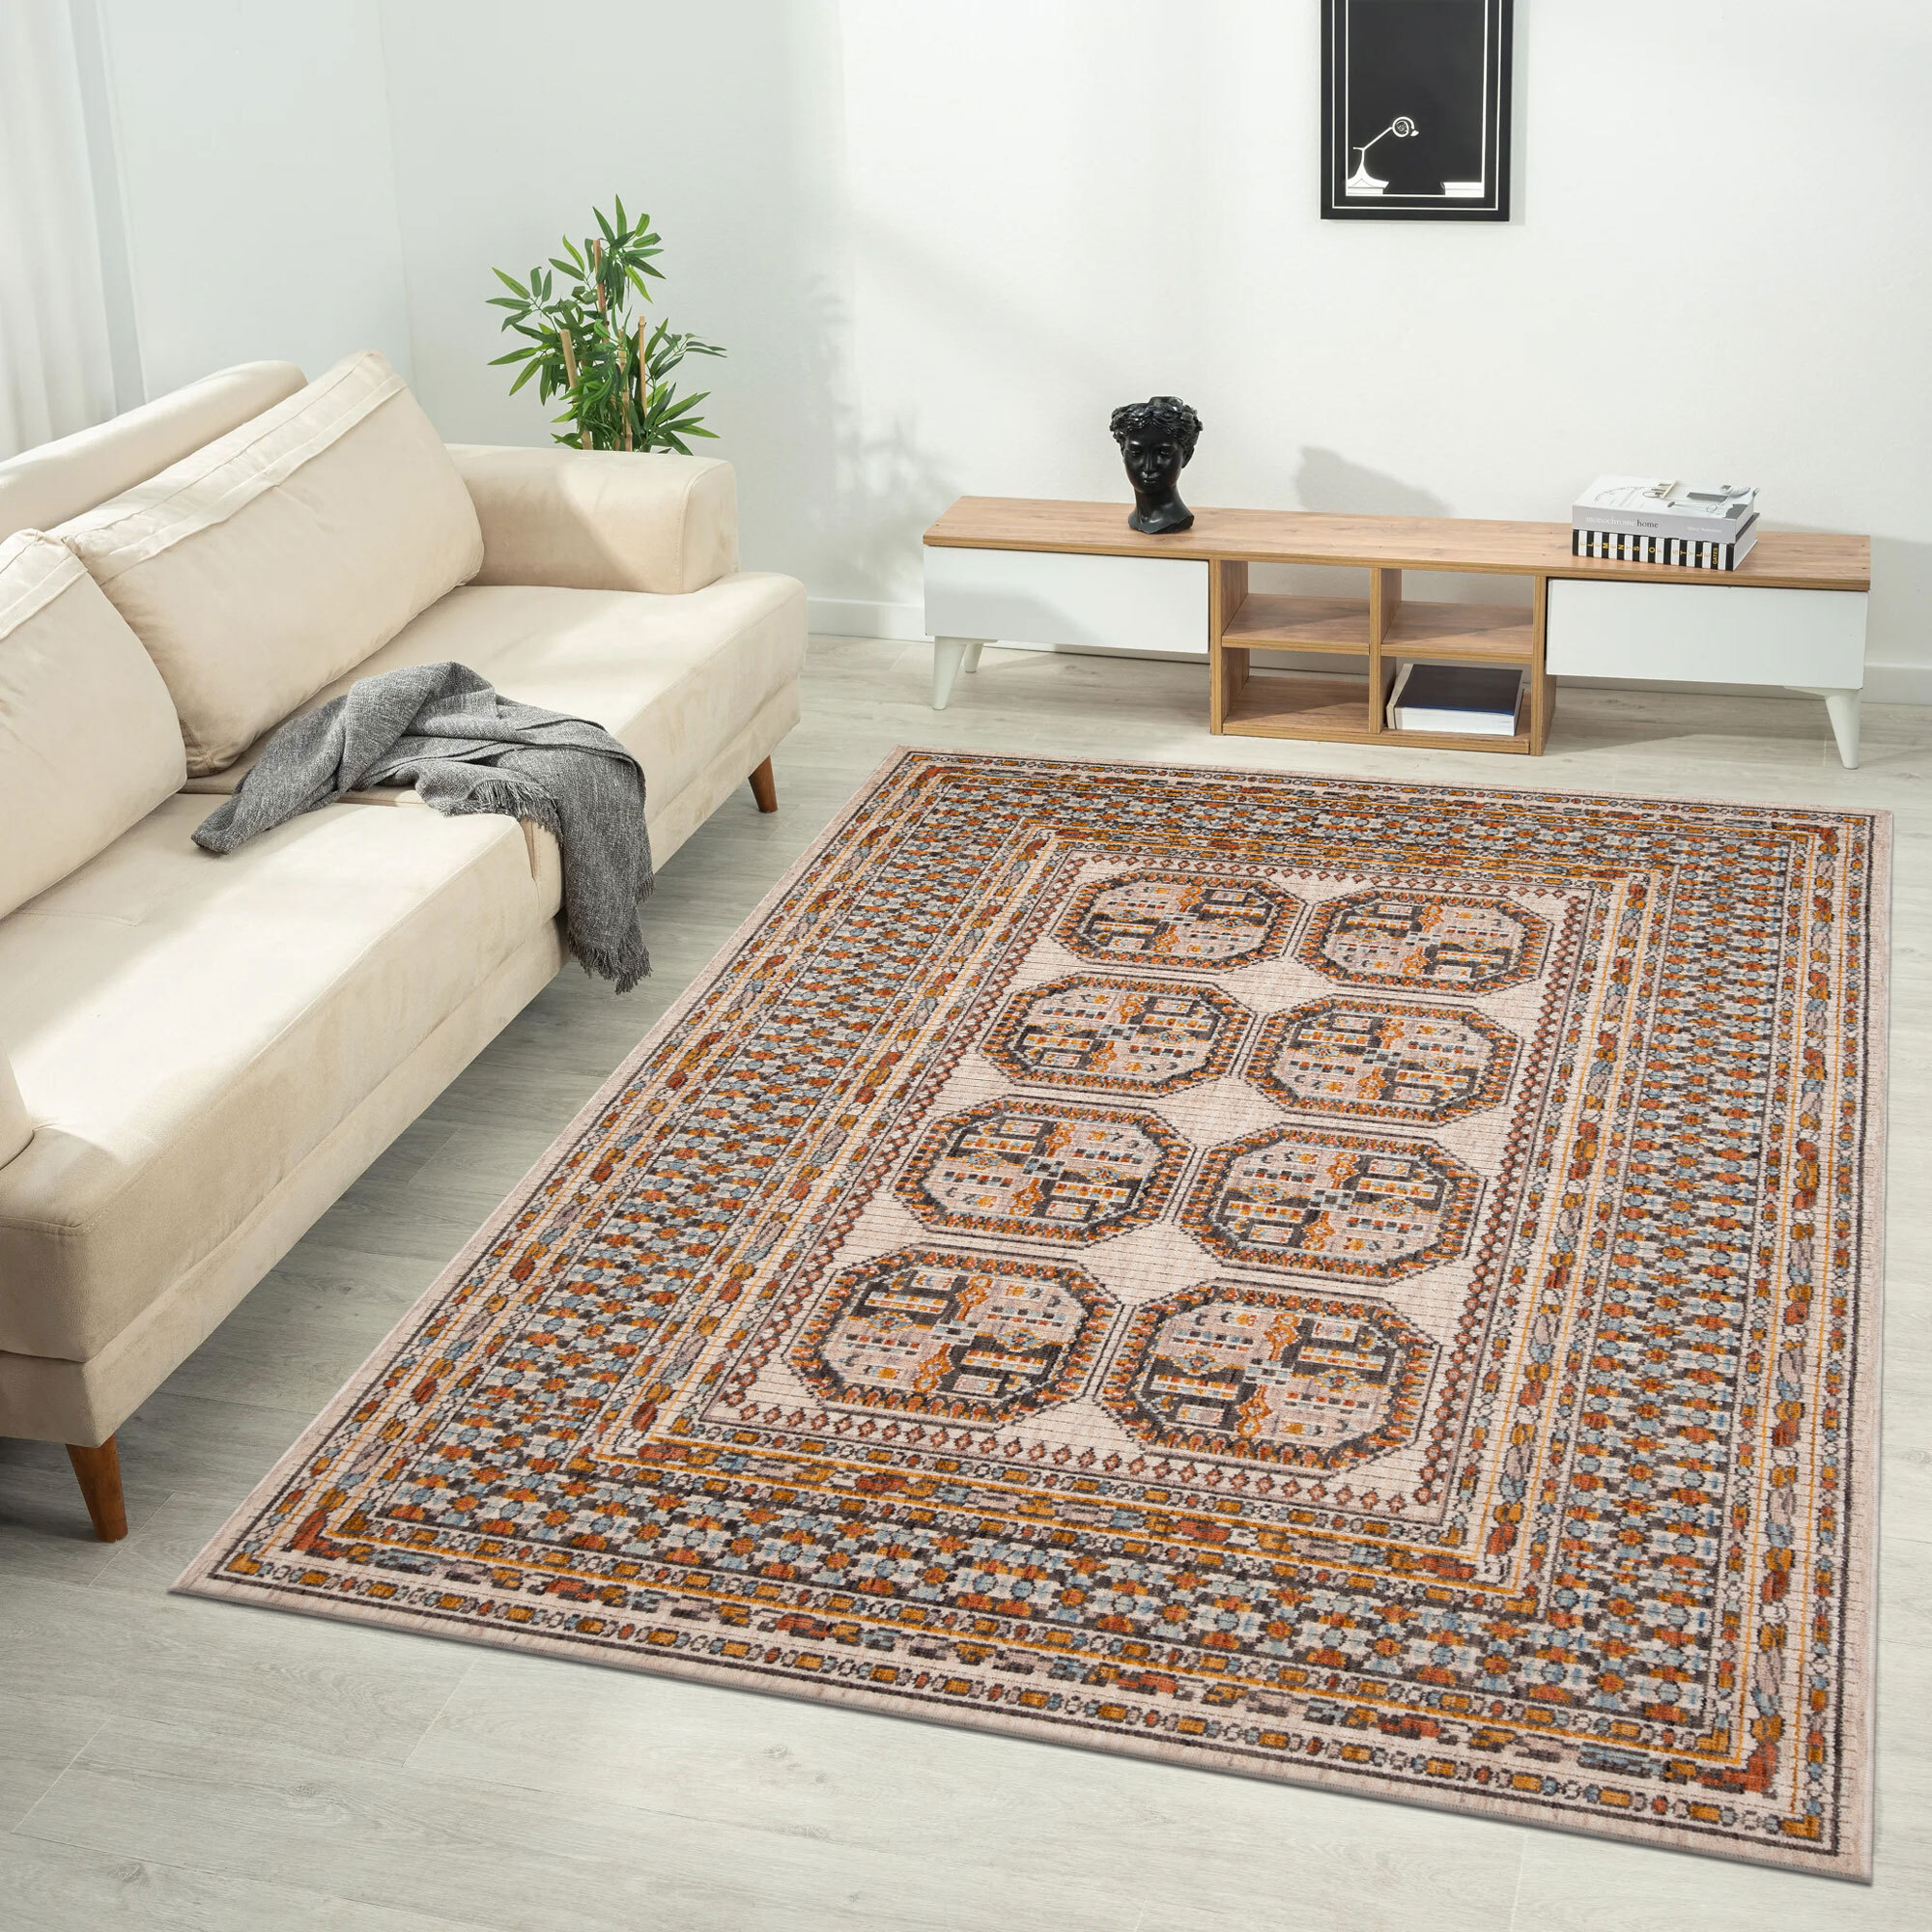 Bokhara Traditional Wool Rug(Size 230 x 160cm)